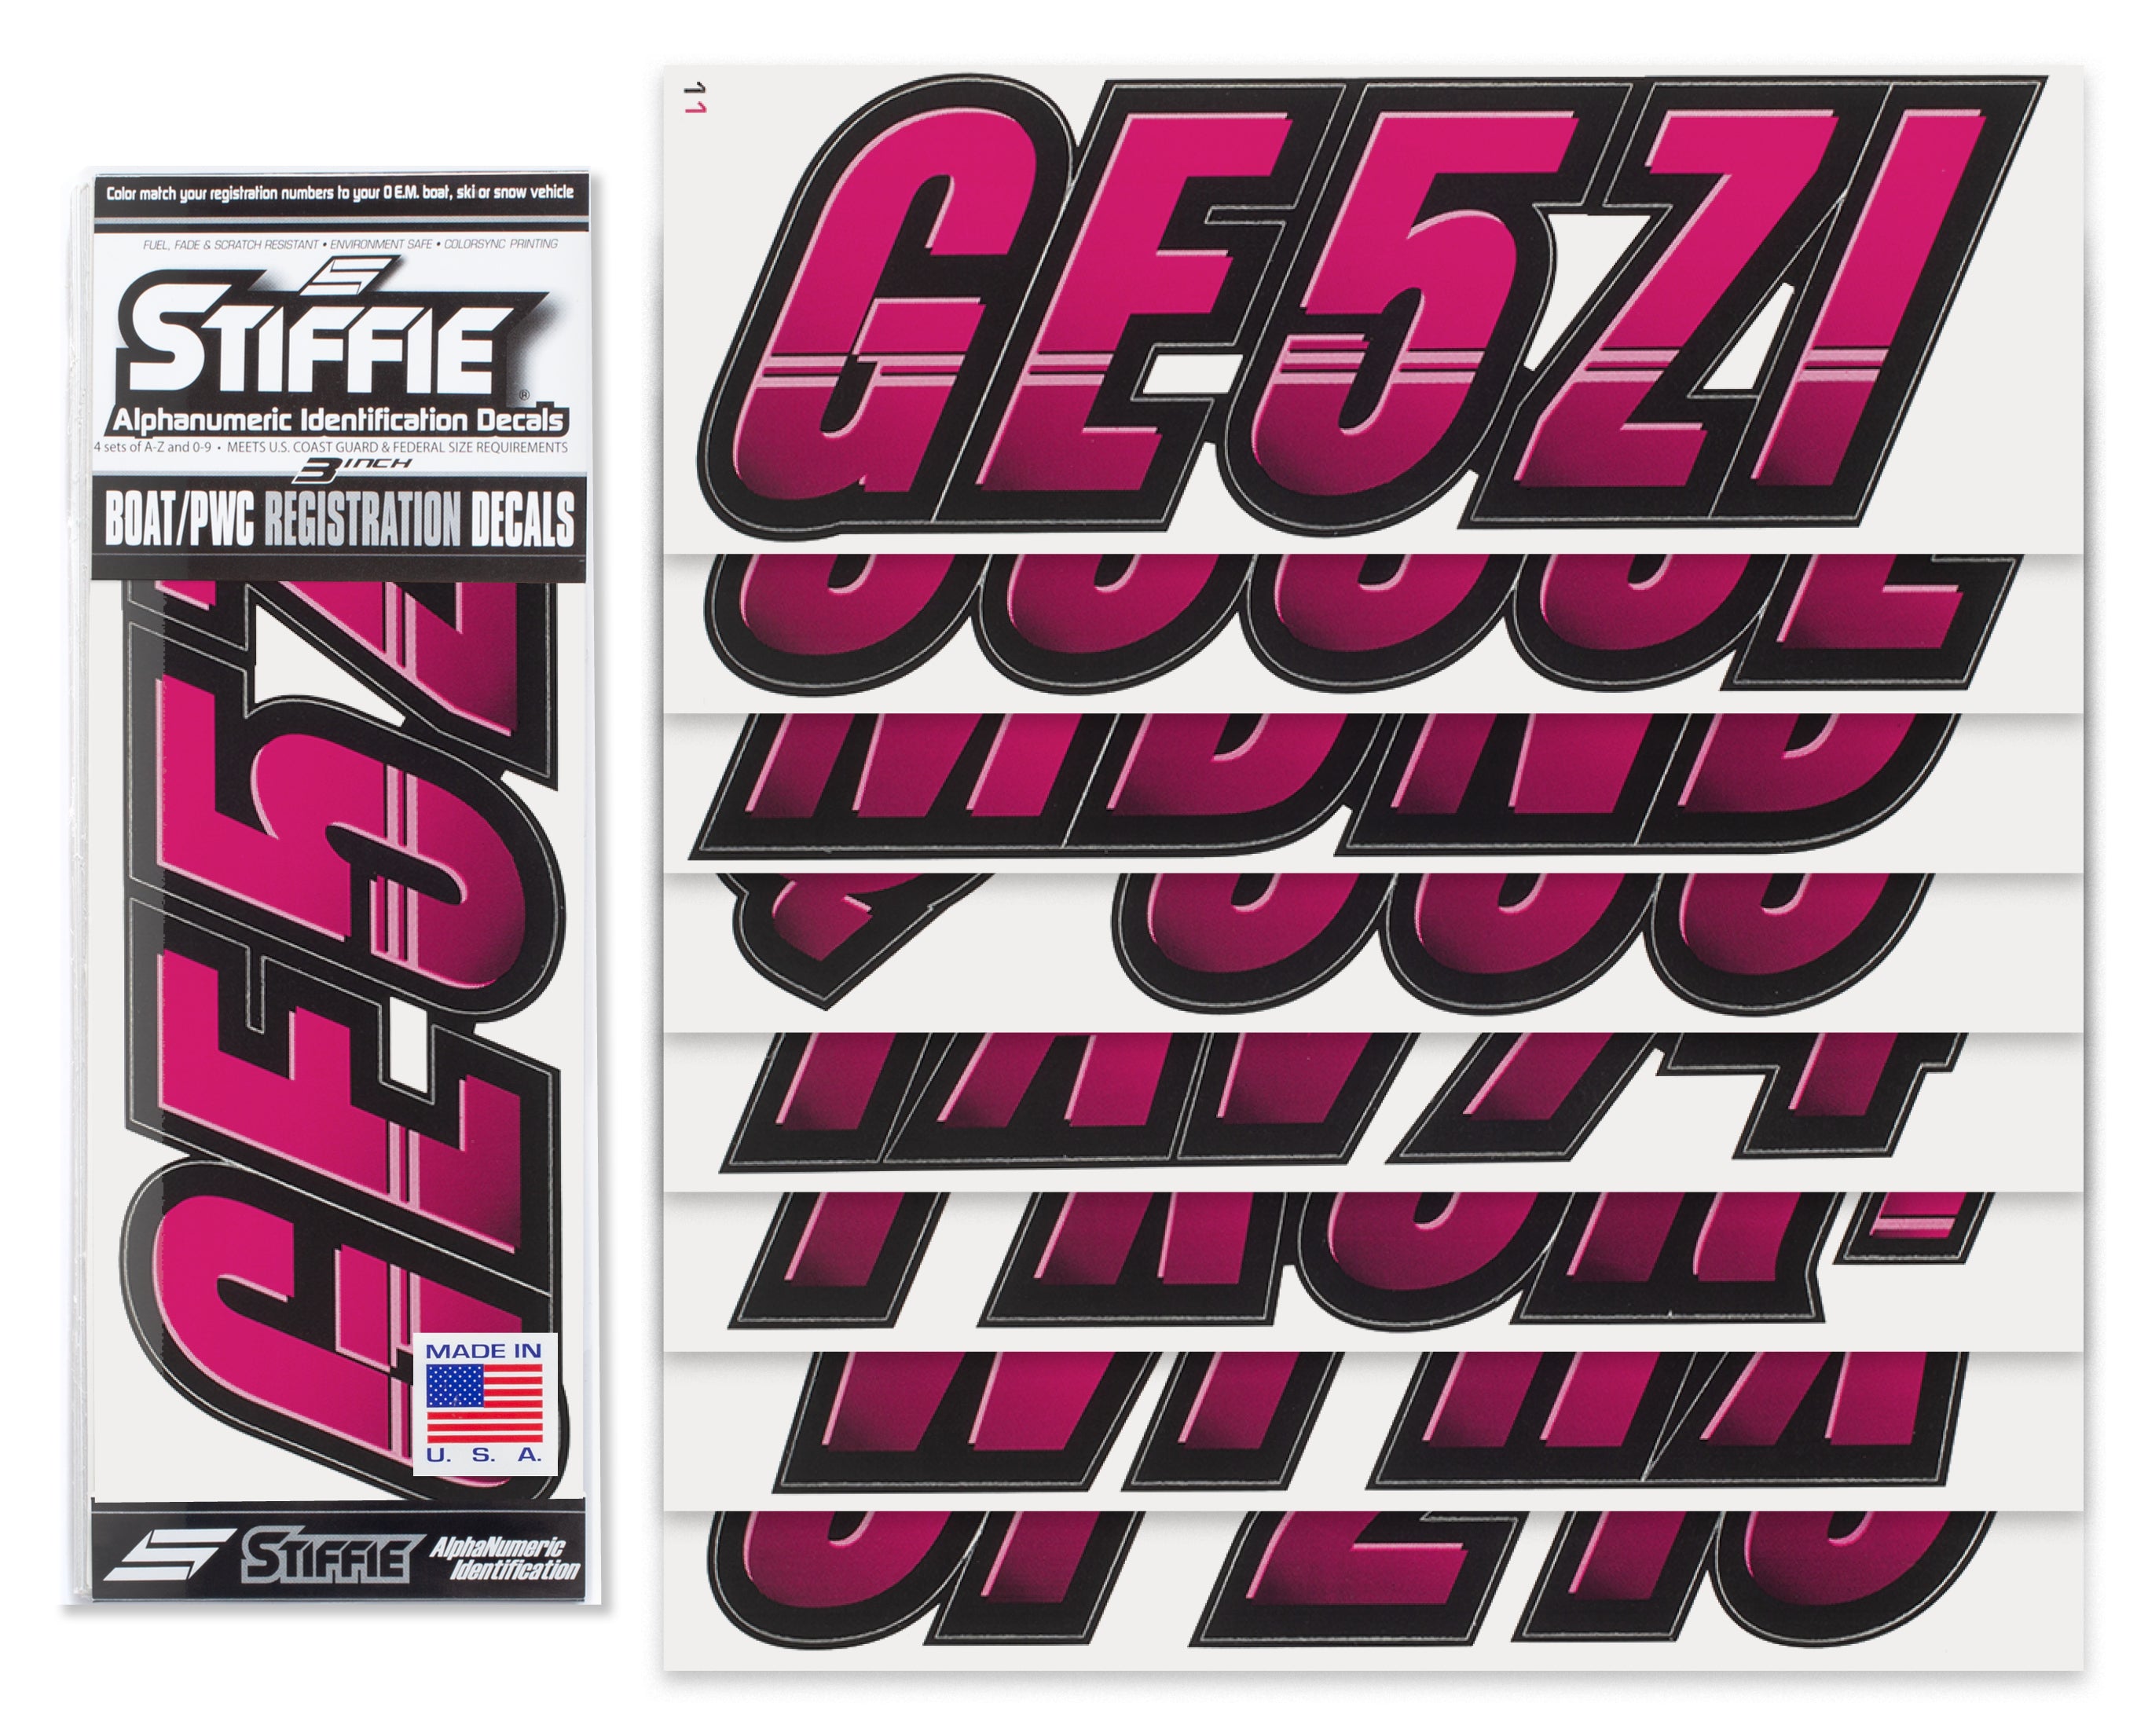 Stiffie Techtron Berry/Black 3" Alpha-Numeric Registration Identification Numbers Stickers Decals for Boats & Personal Watercraft